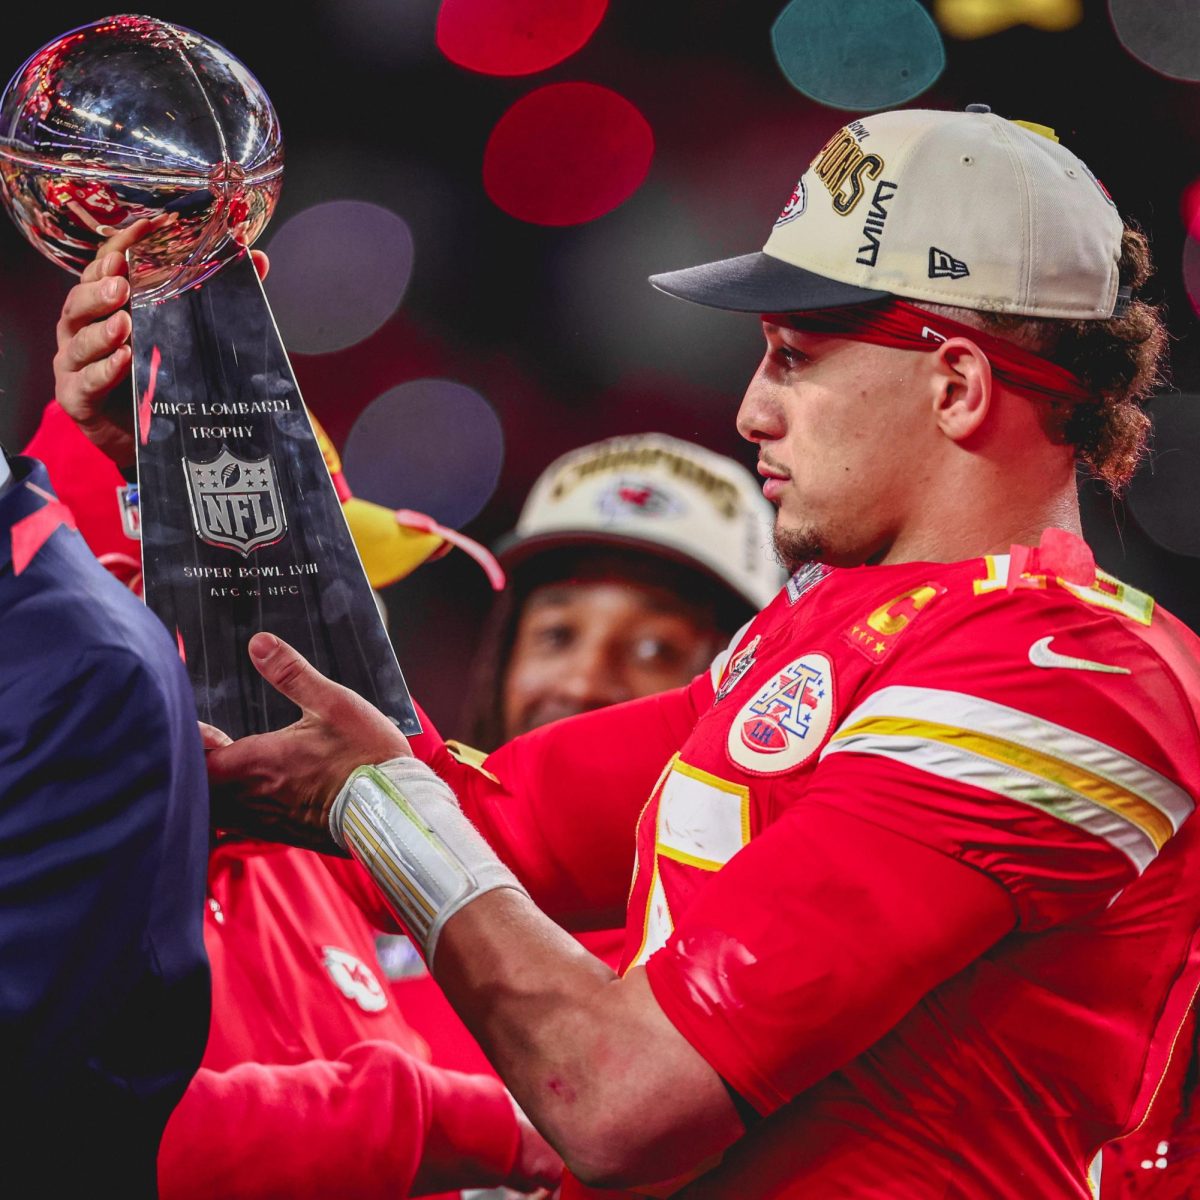 Mahomes and the Chiefs won their second straight Super Bowl on Sunday. (Courtesy of Twitter)